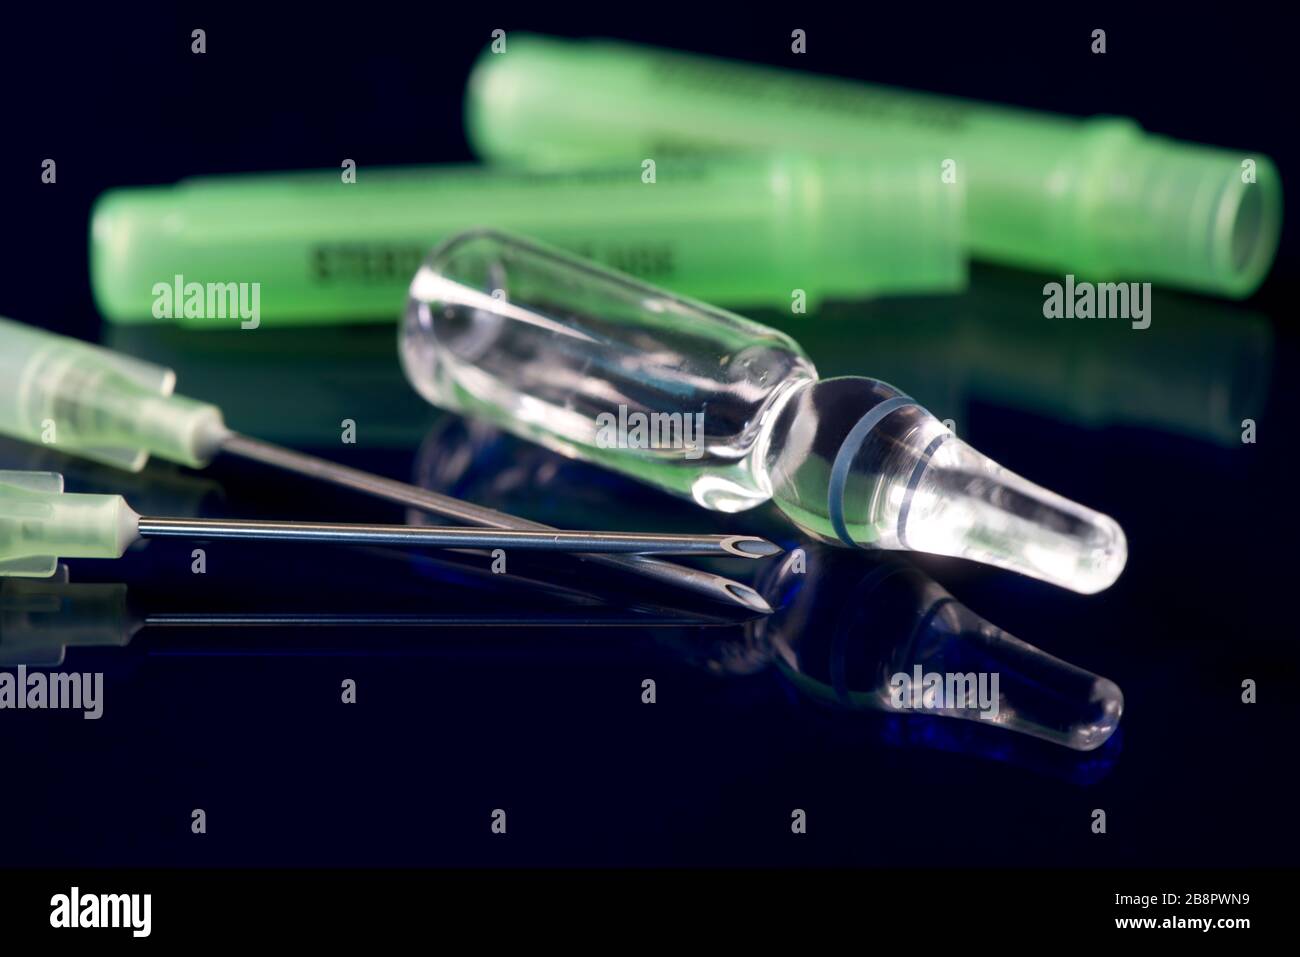 Clear glass medication ampule with two filter needles on blue reflective surface. Stock Photo